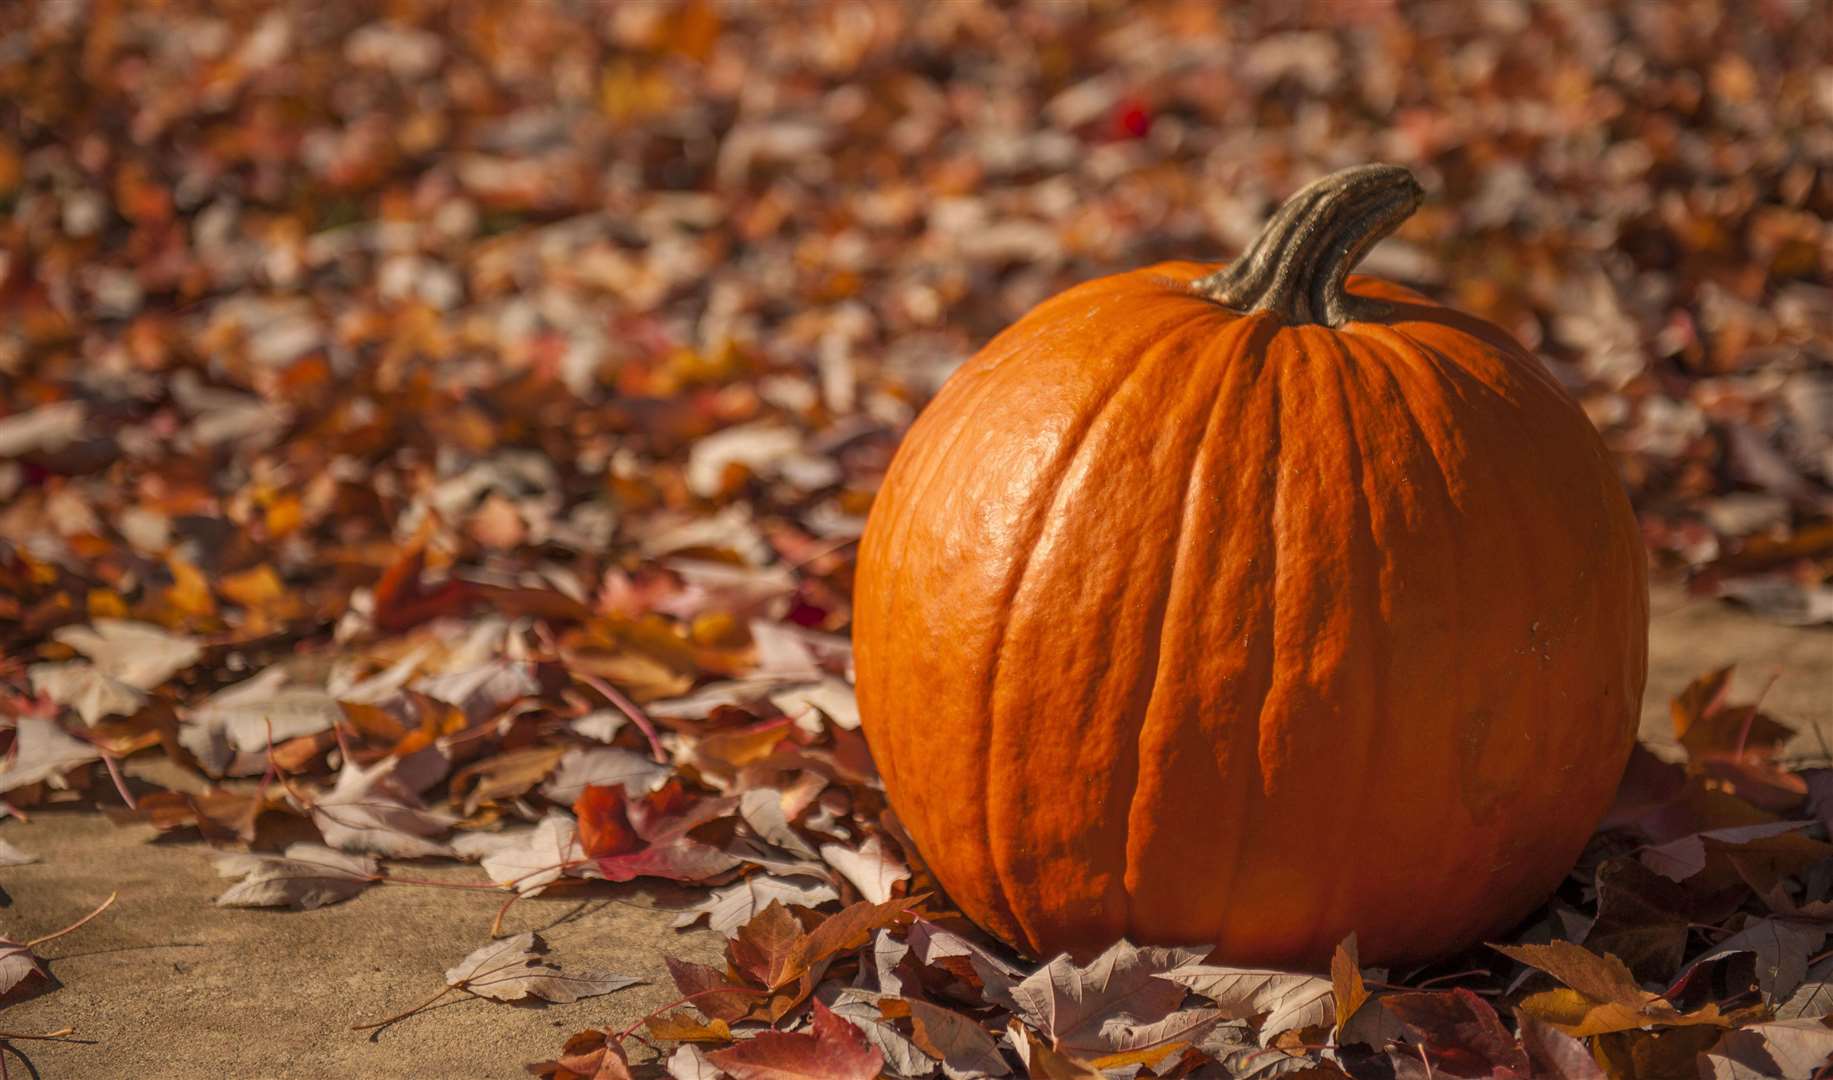 Have you picked up a pumpkin yet?